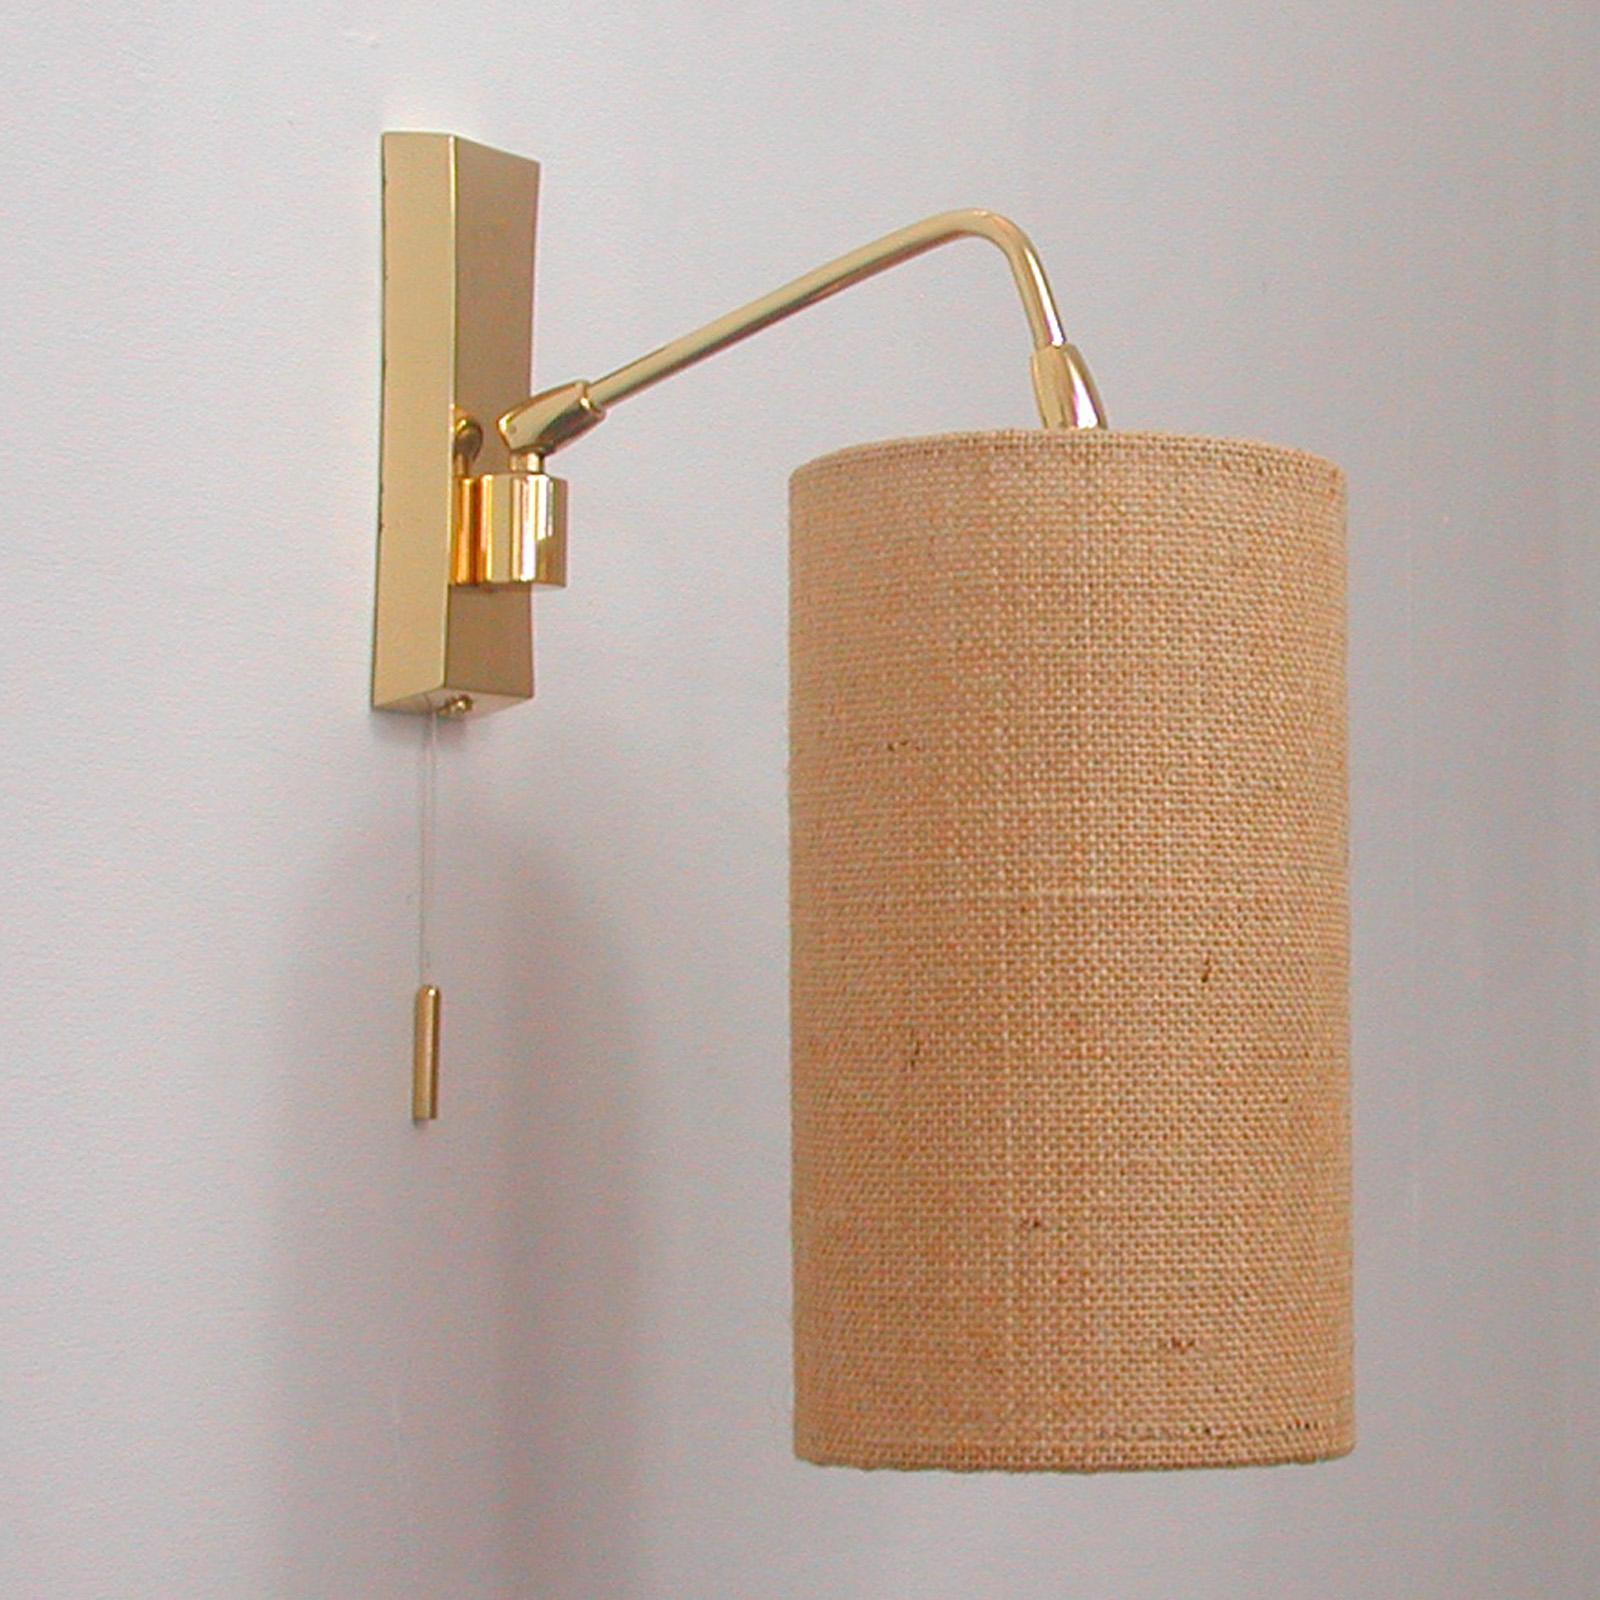 Midcentury Brass and Sisal Adjustable Sconce, Kalmar Attributed., Austria, 1960s For Sale 3